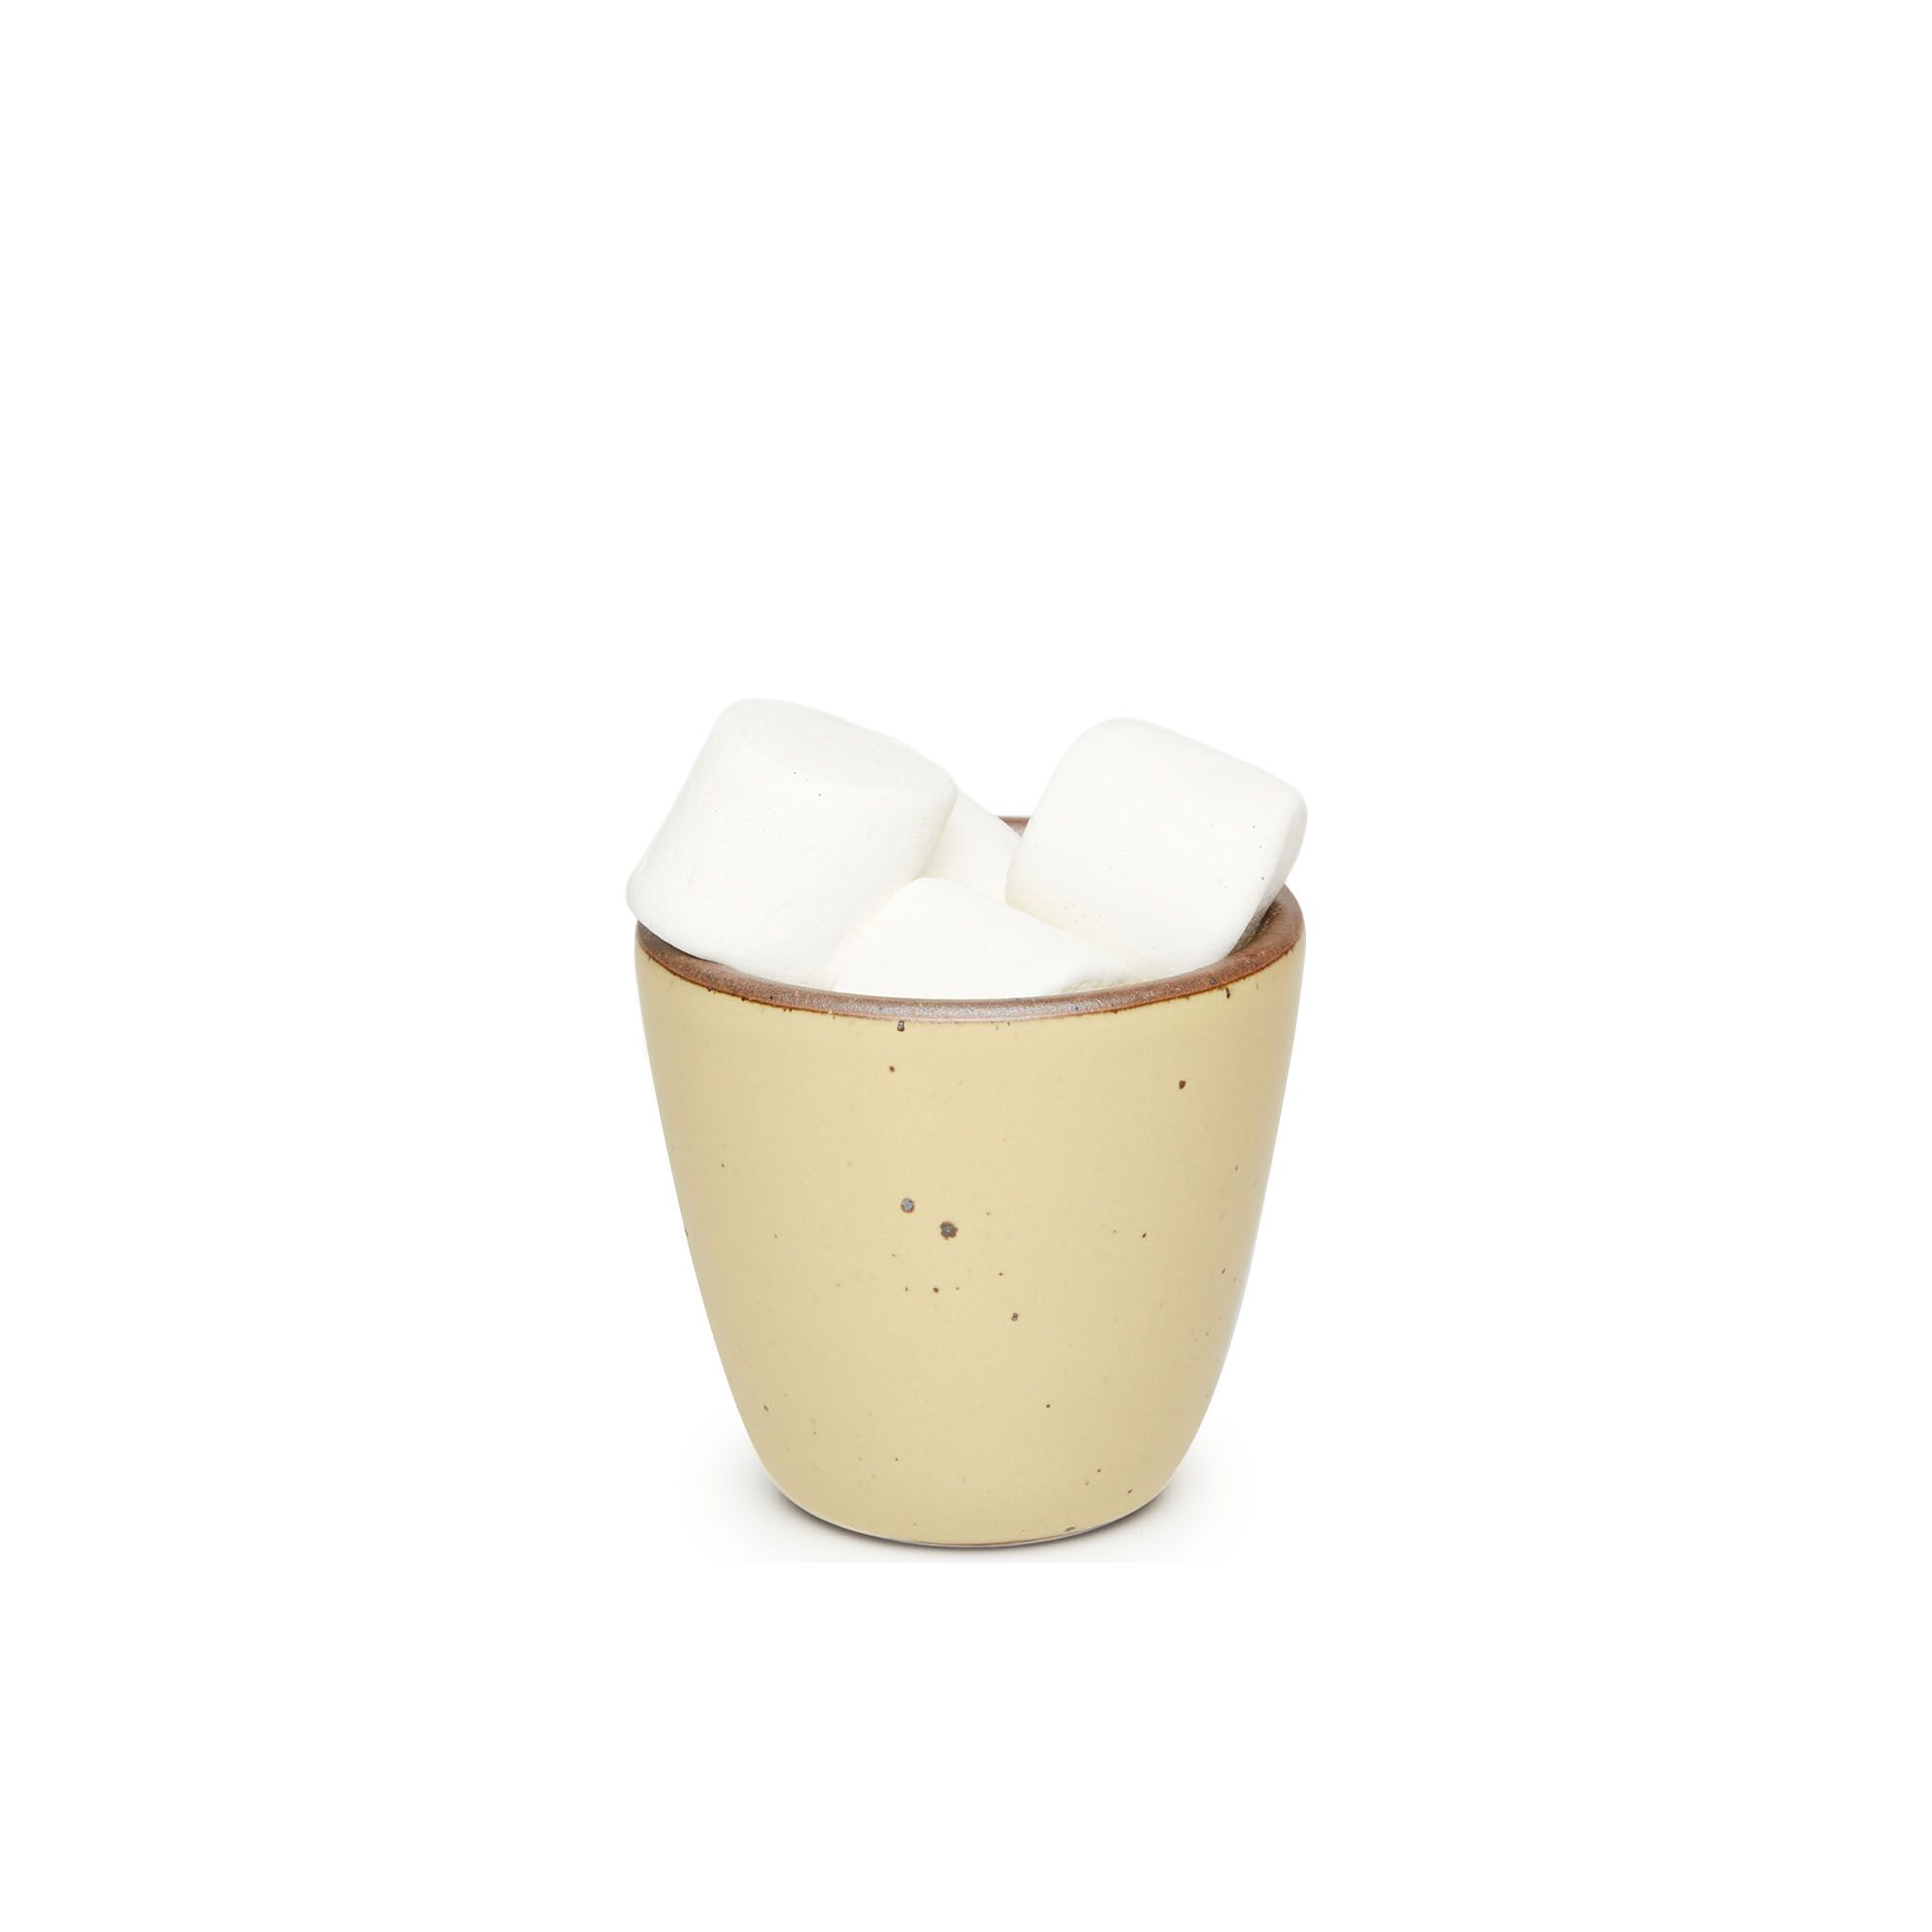 A short cup that tapers out to get wider at the top in a light butter yellow color featuring iron speckles, filled with marshmallows